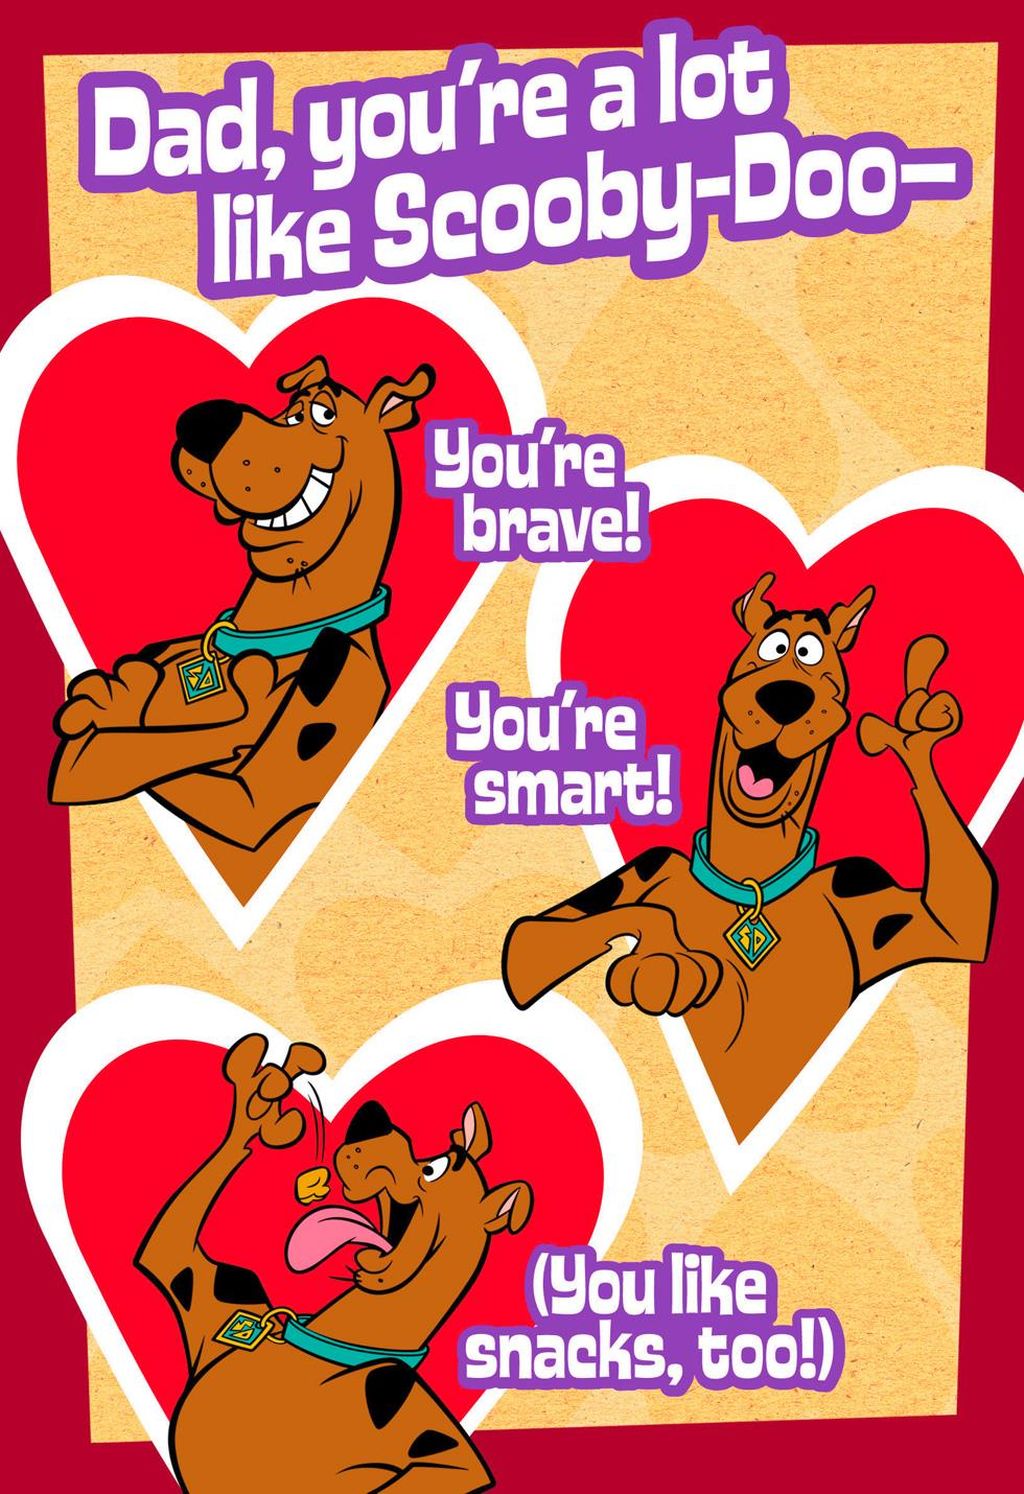 Best Happy Valentines Day Scooby Doo Image HD Greetings